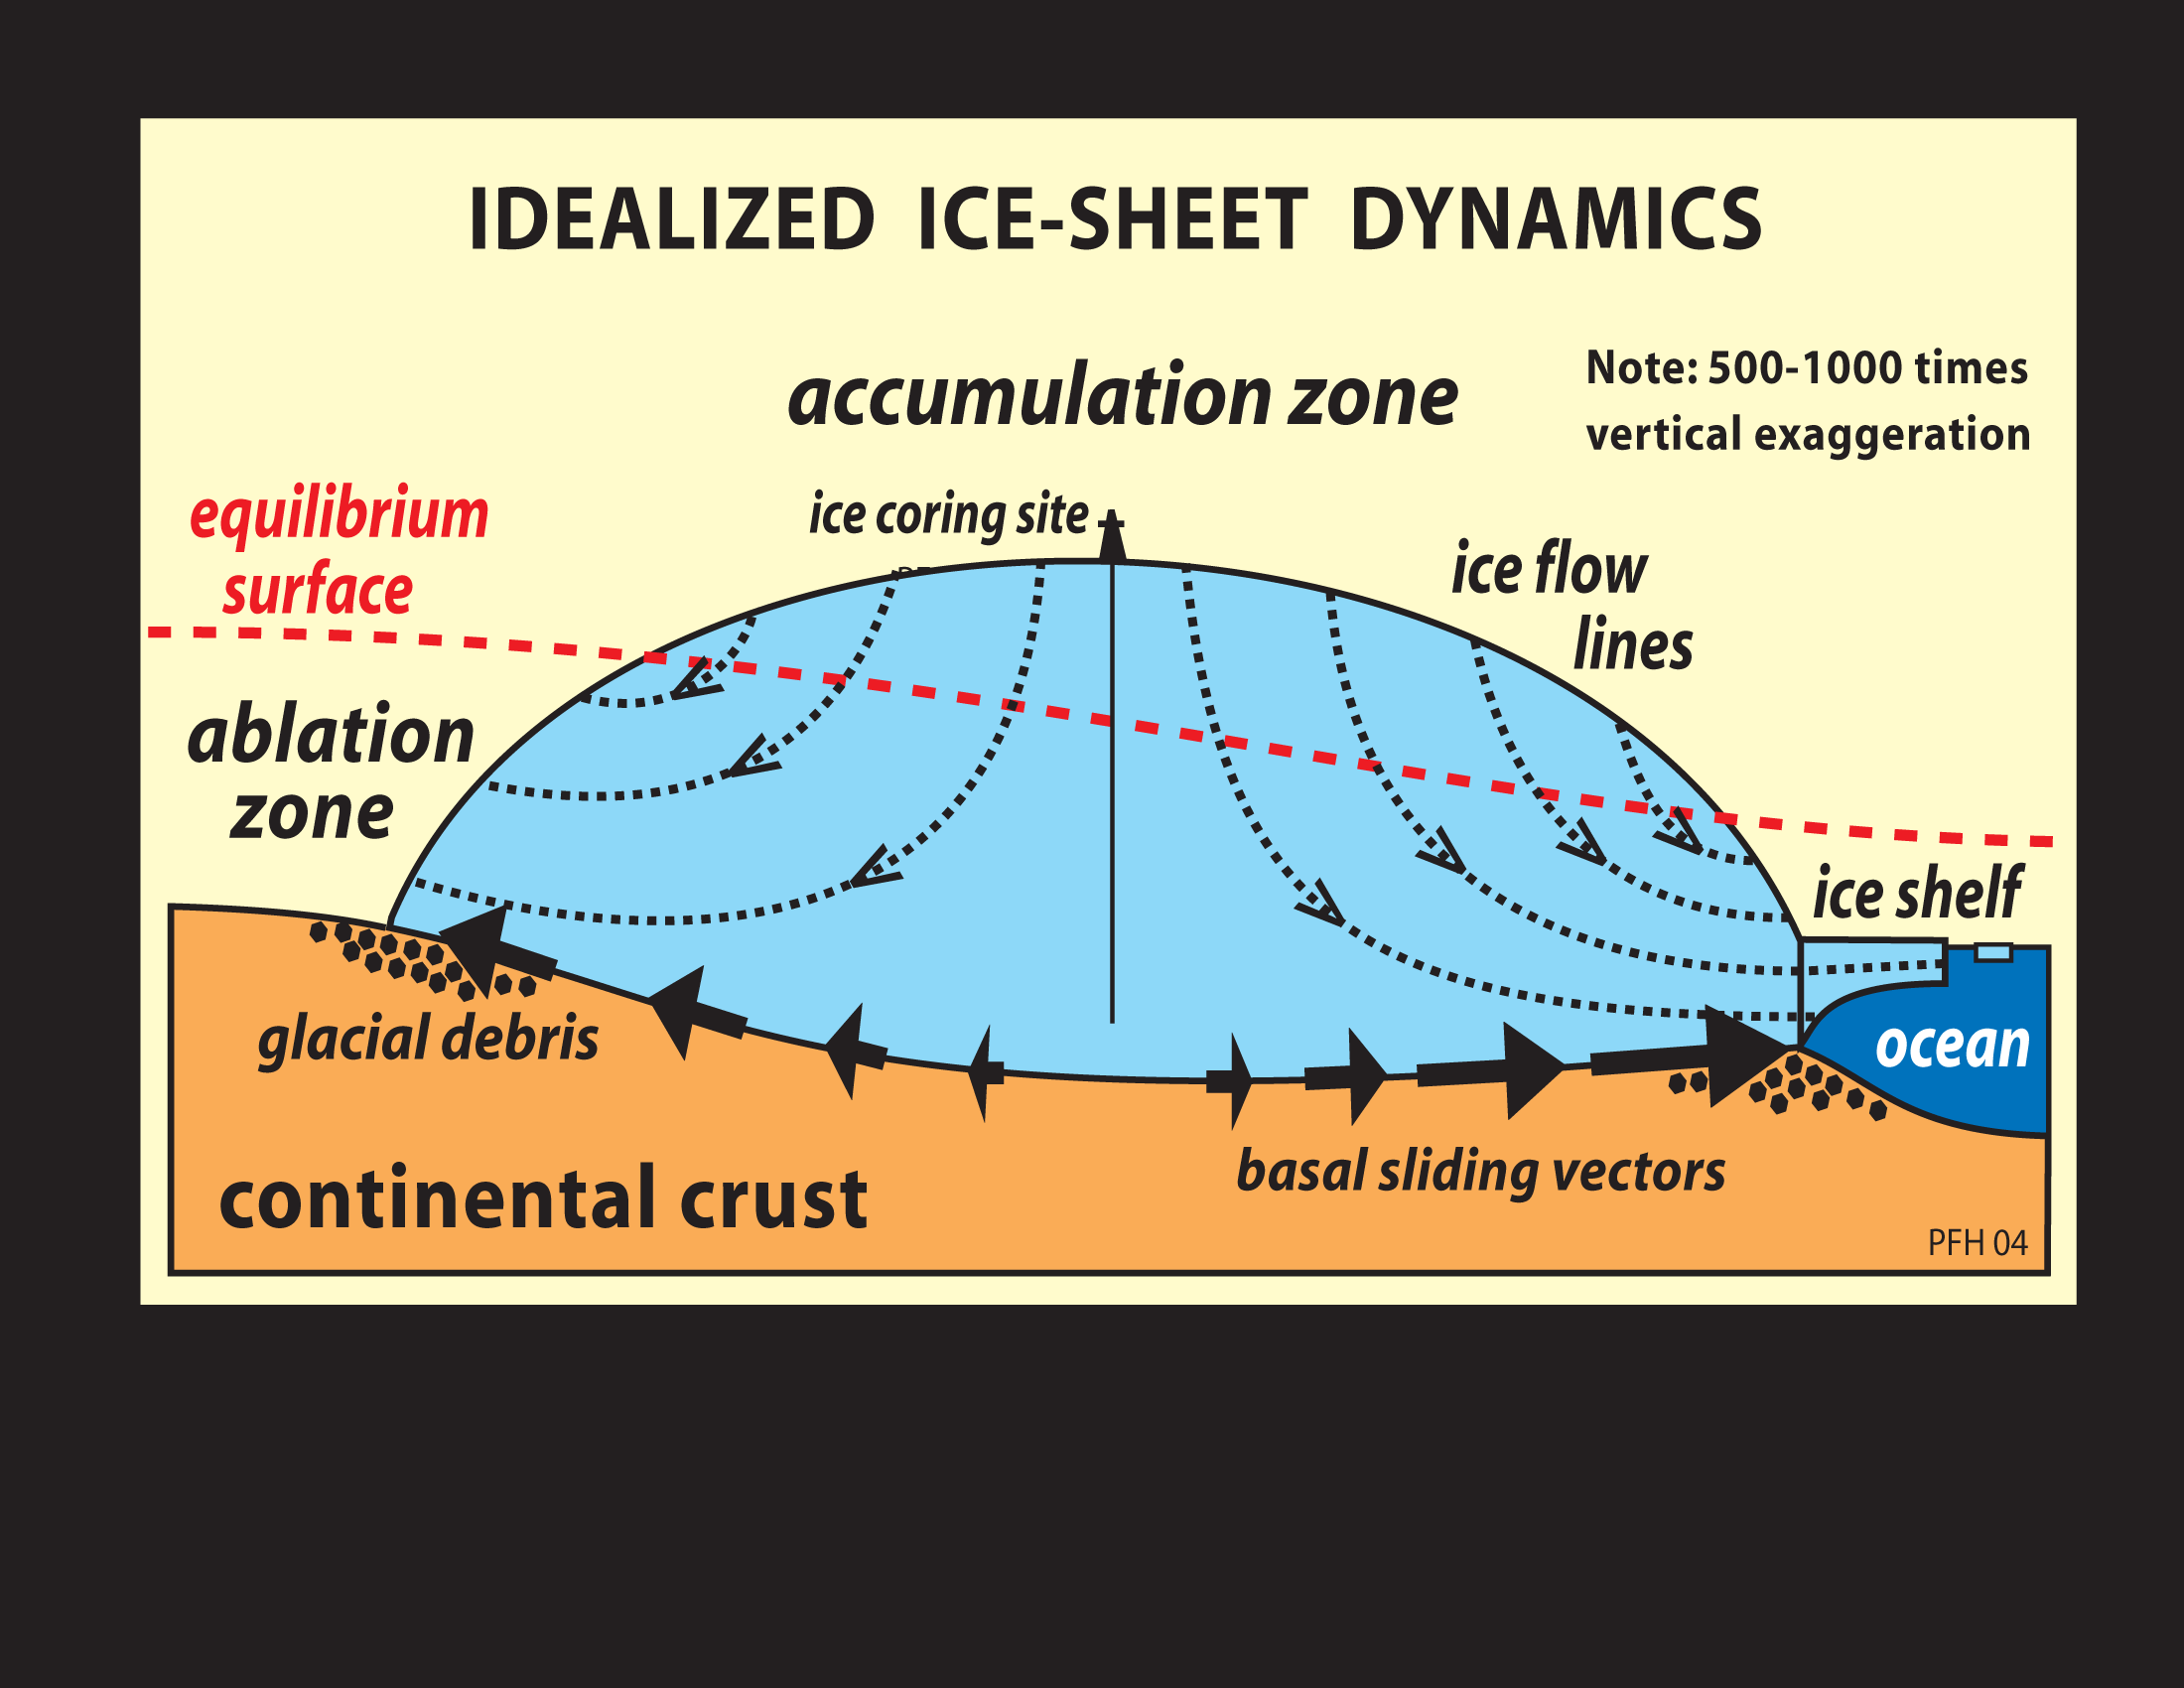 Why use ice cores?